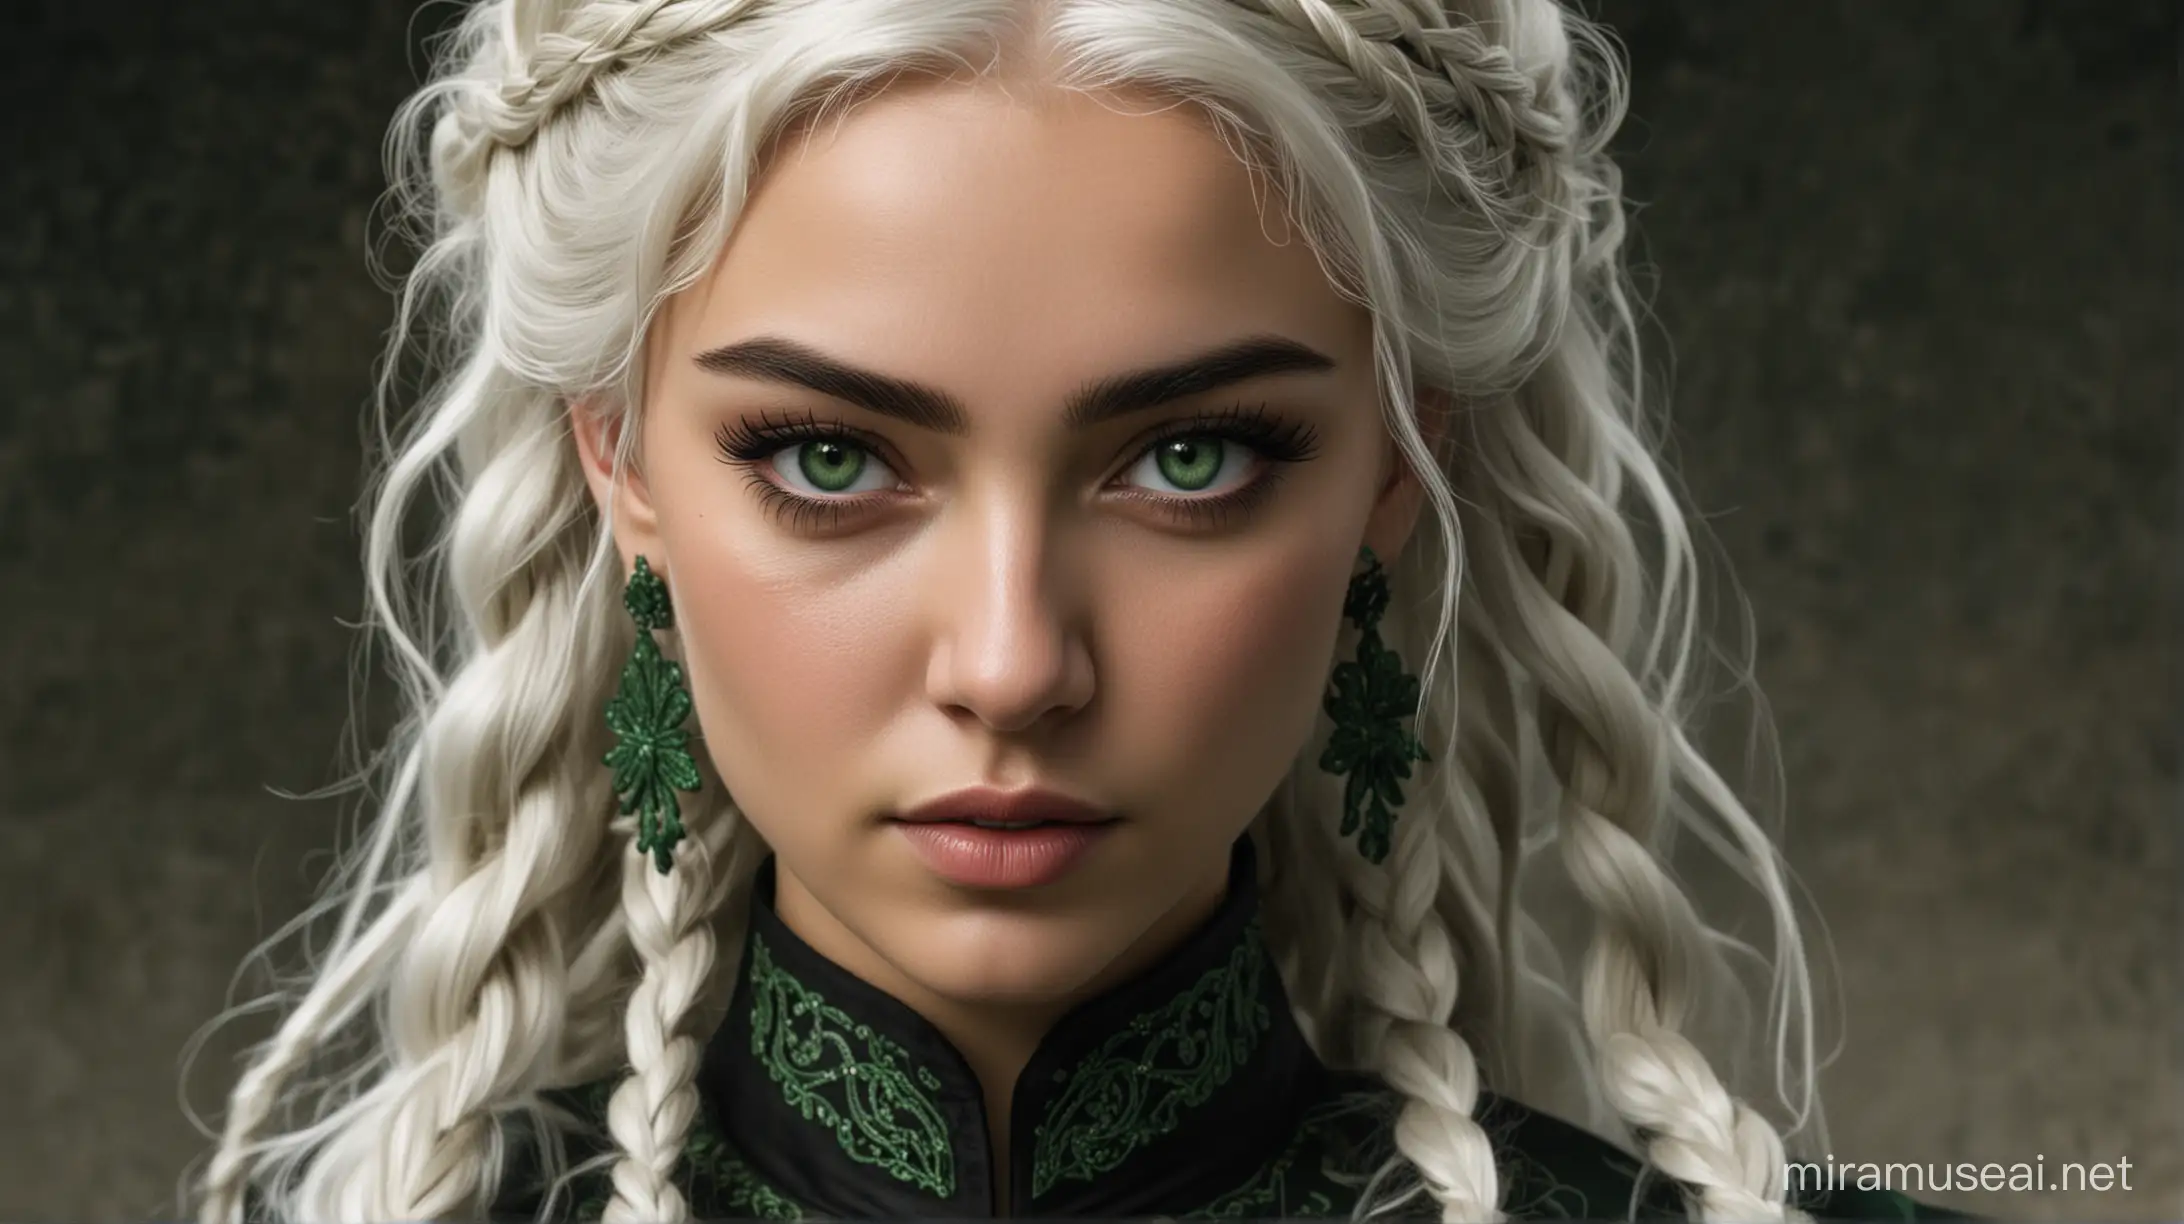 targaryen princess, dark emerald green eyes, white hair, dressed in black with green embroidery, wavy hair, determined expression with her brows slightly furrowed, hair styled in braids, mid 20s